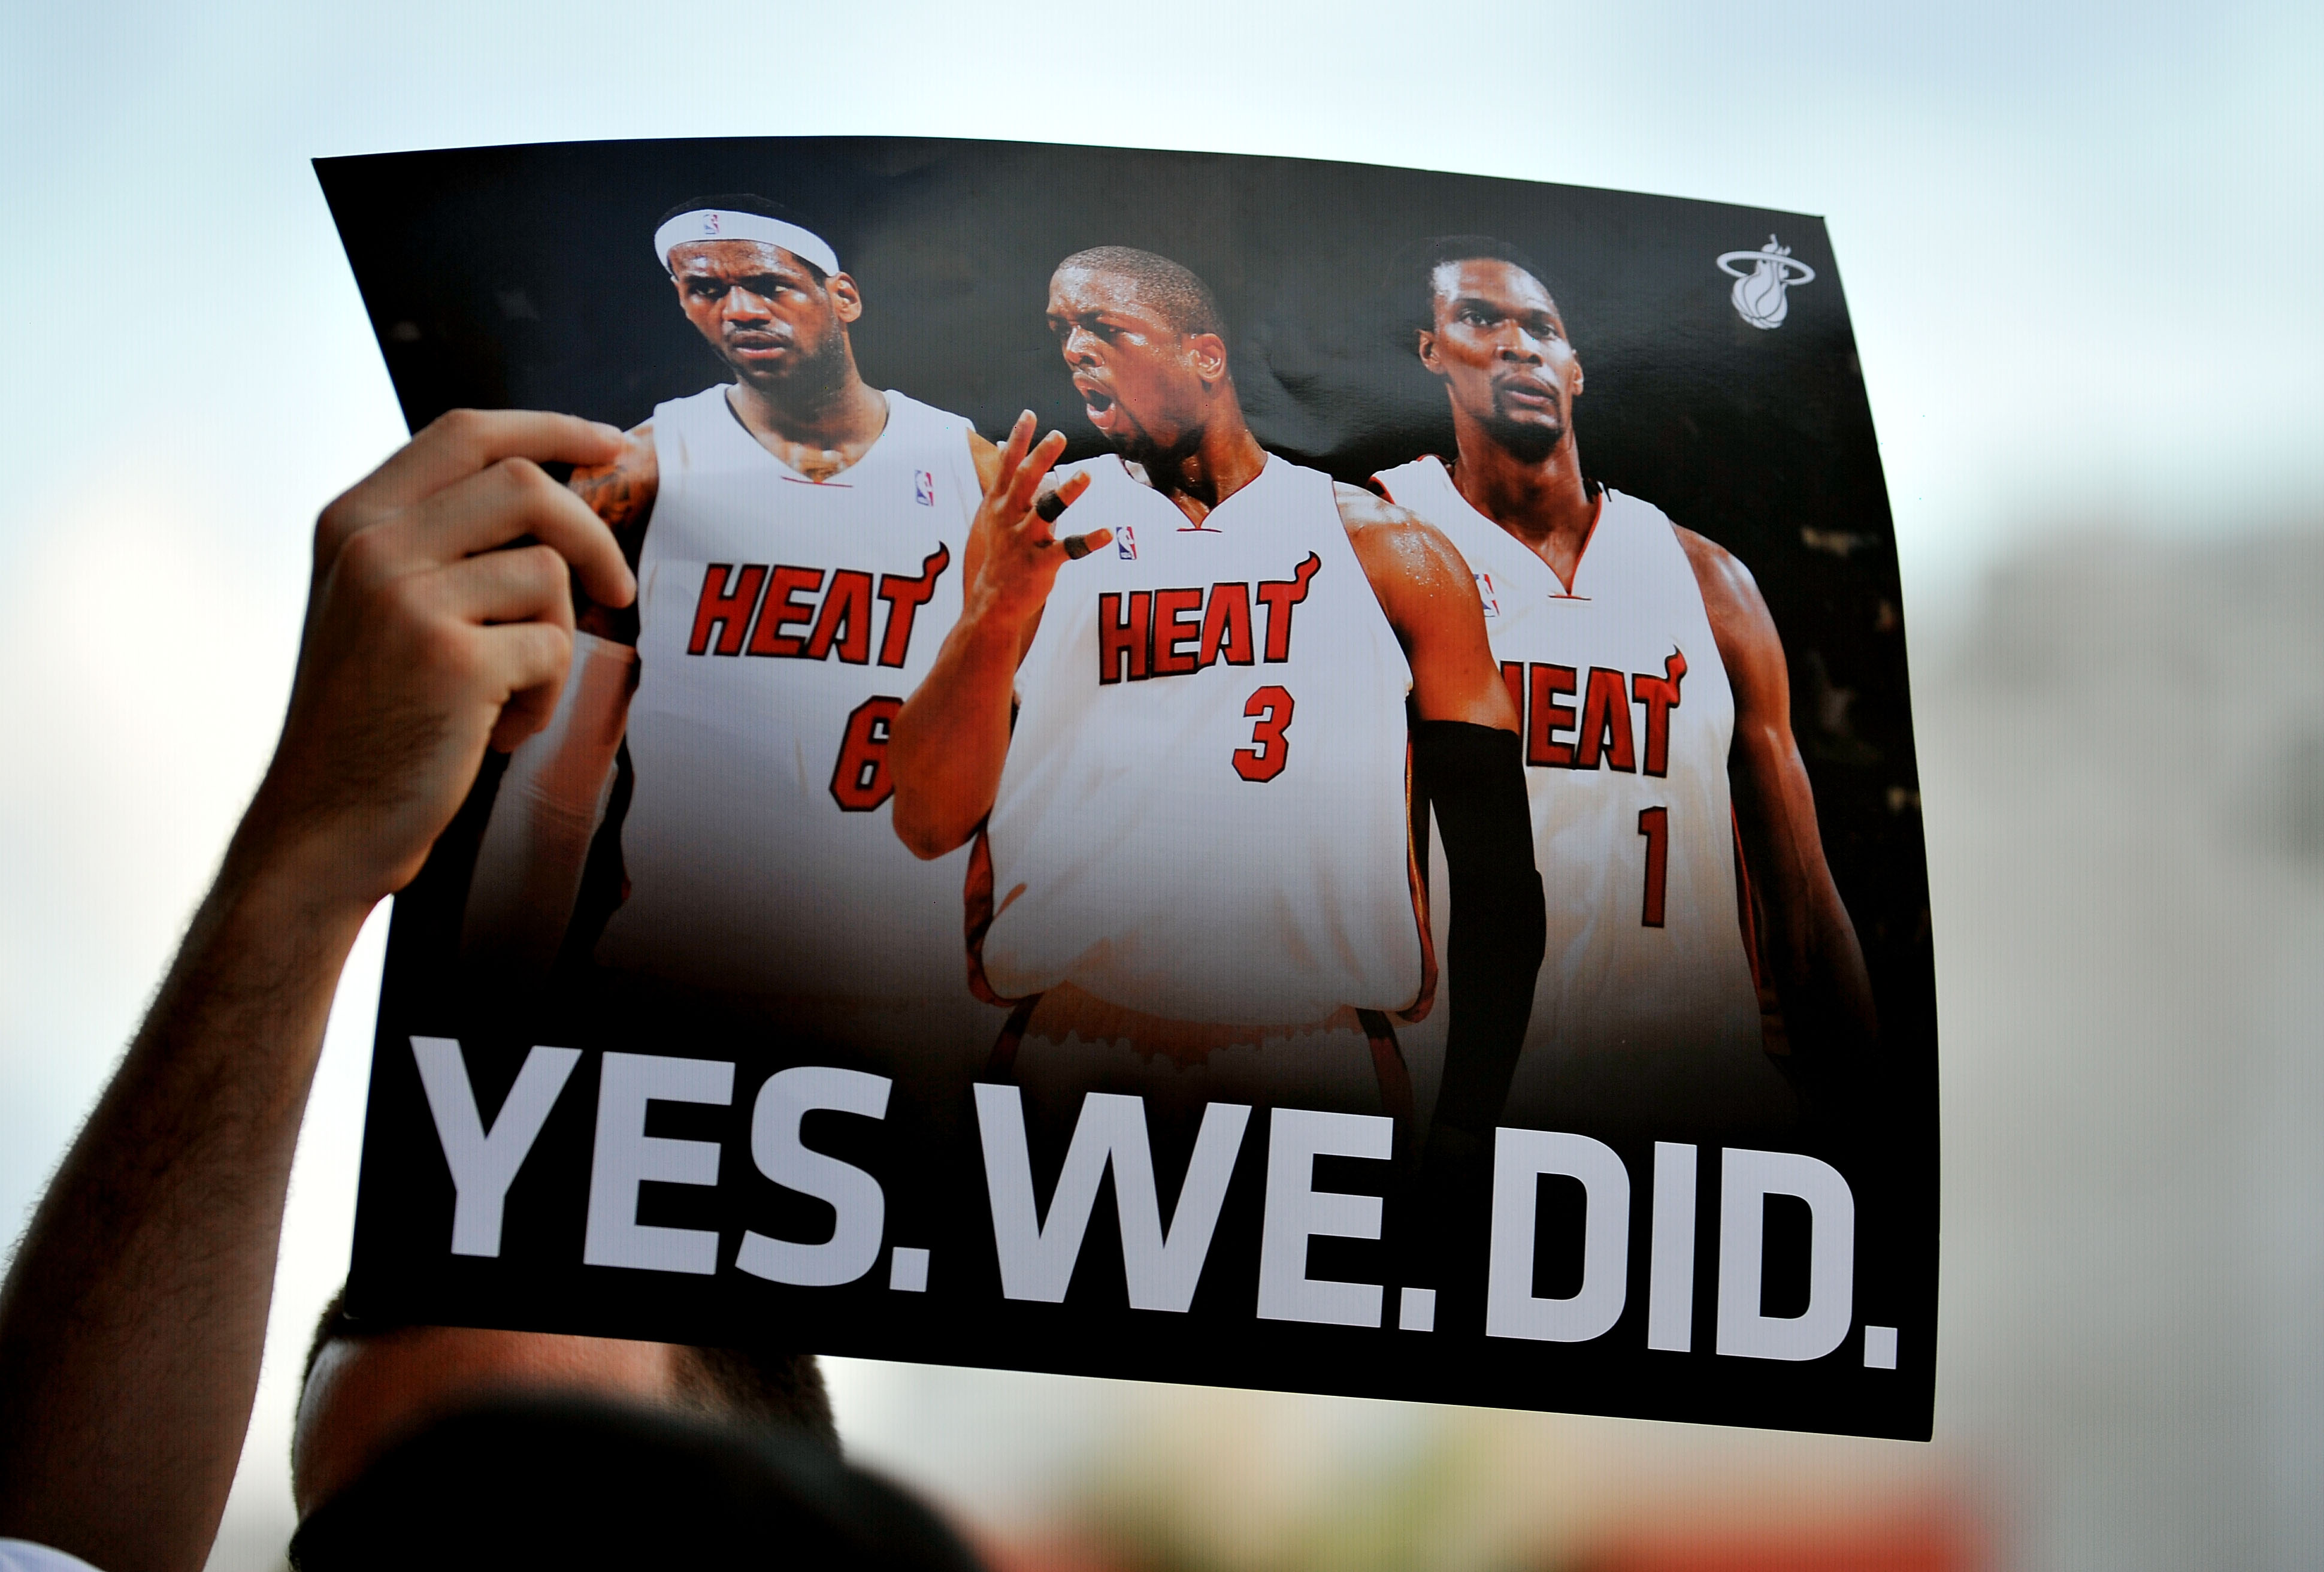 MIAMI - JULY 09:  A fan holds up a poster  of Chris Bosh #1, Dwyane Wade #3 and LeBron James #6 of the Miami Heat before the start of a welcome party for the new players at American Airlines Arena on July 9, 2010 in Miami, Florida.  (Photo by Doug Benc/Ge